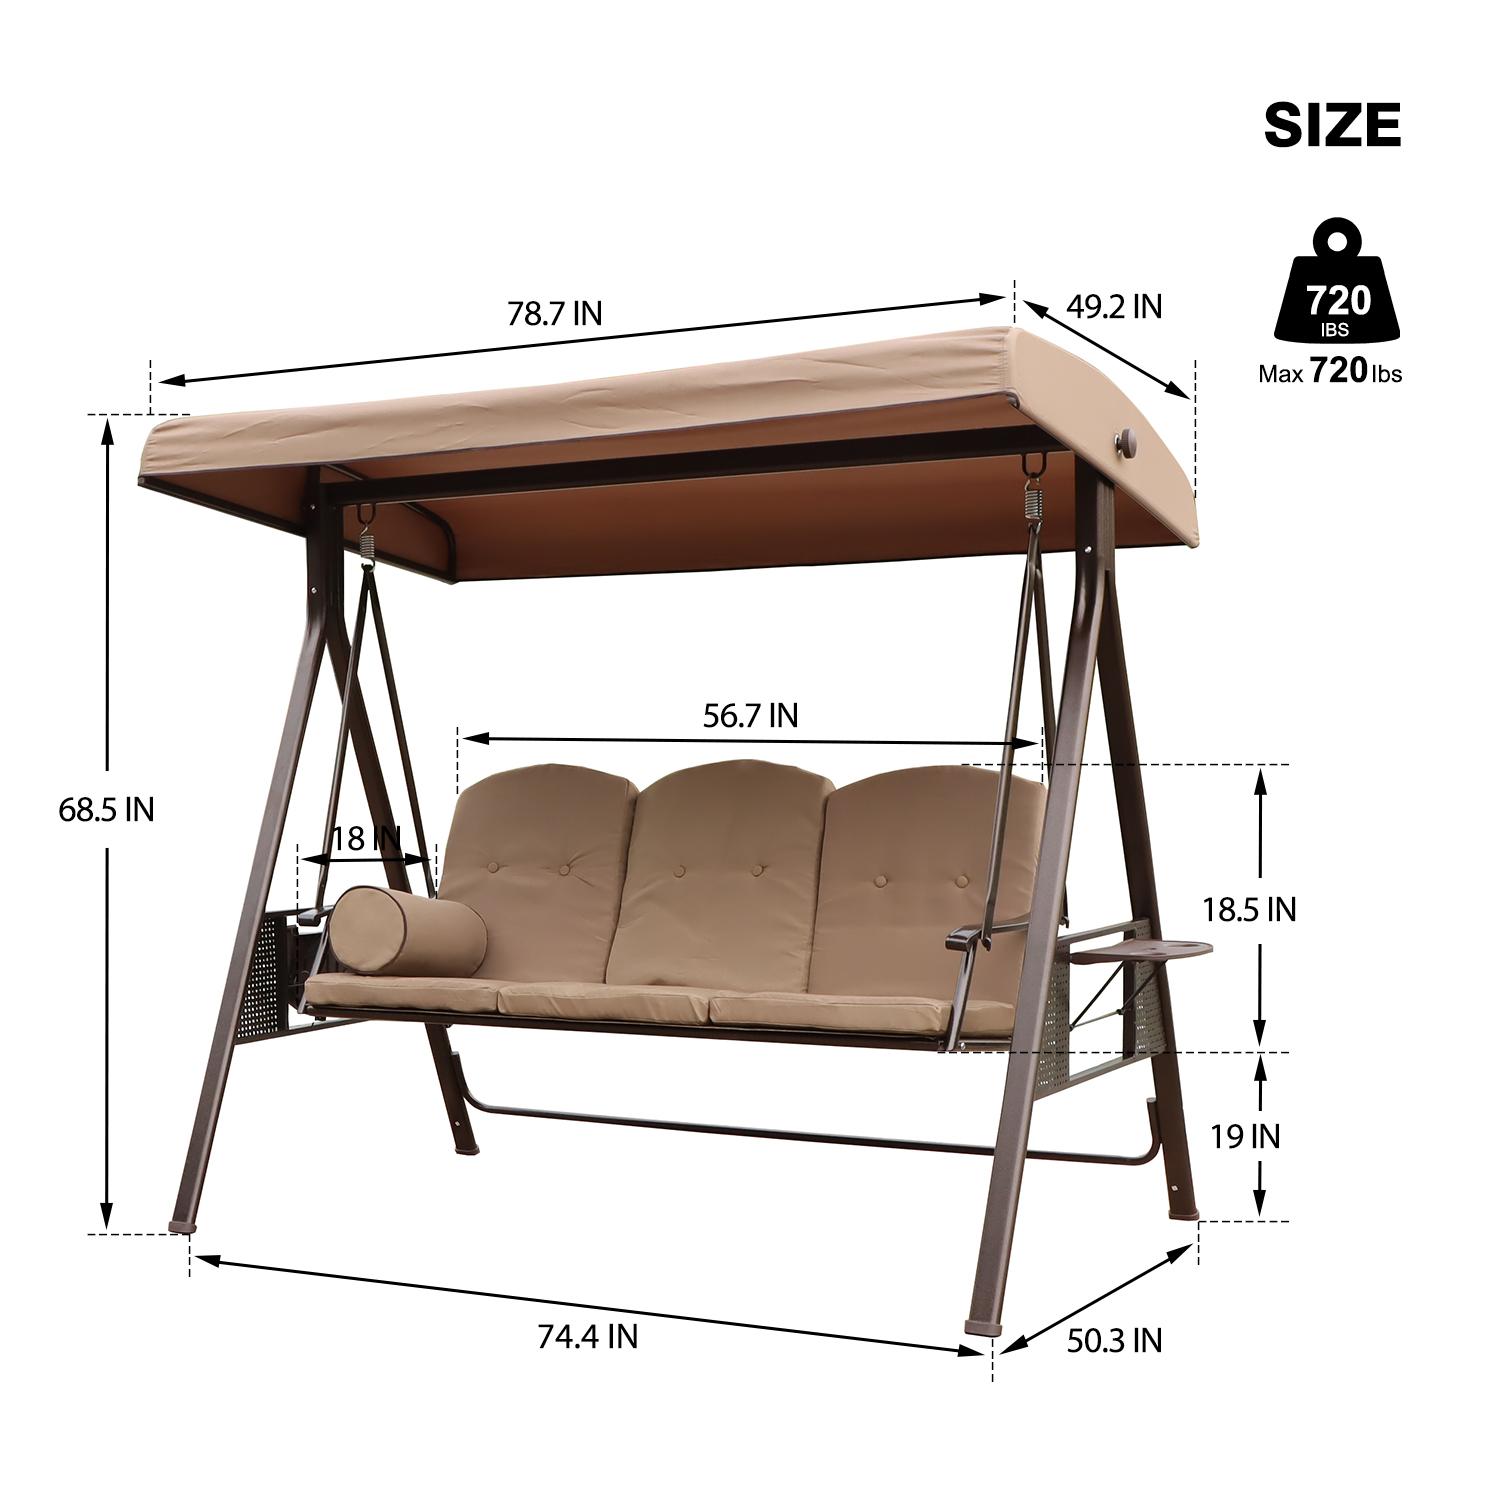 Leisure 3-Seat Patio Swing Glider Outdoor Canopy with Removable Cushions and Pillows for Backyard, Adjustable Shade Chair Hammock Lounge Chair Porch Garden with Side Tray and Steel Frame - Beige - image 5 of 8